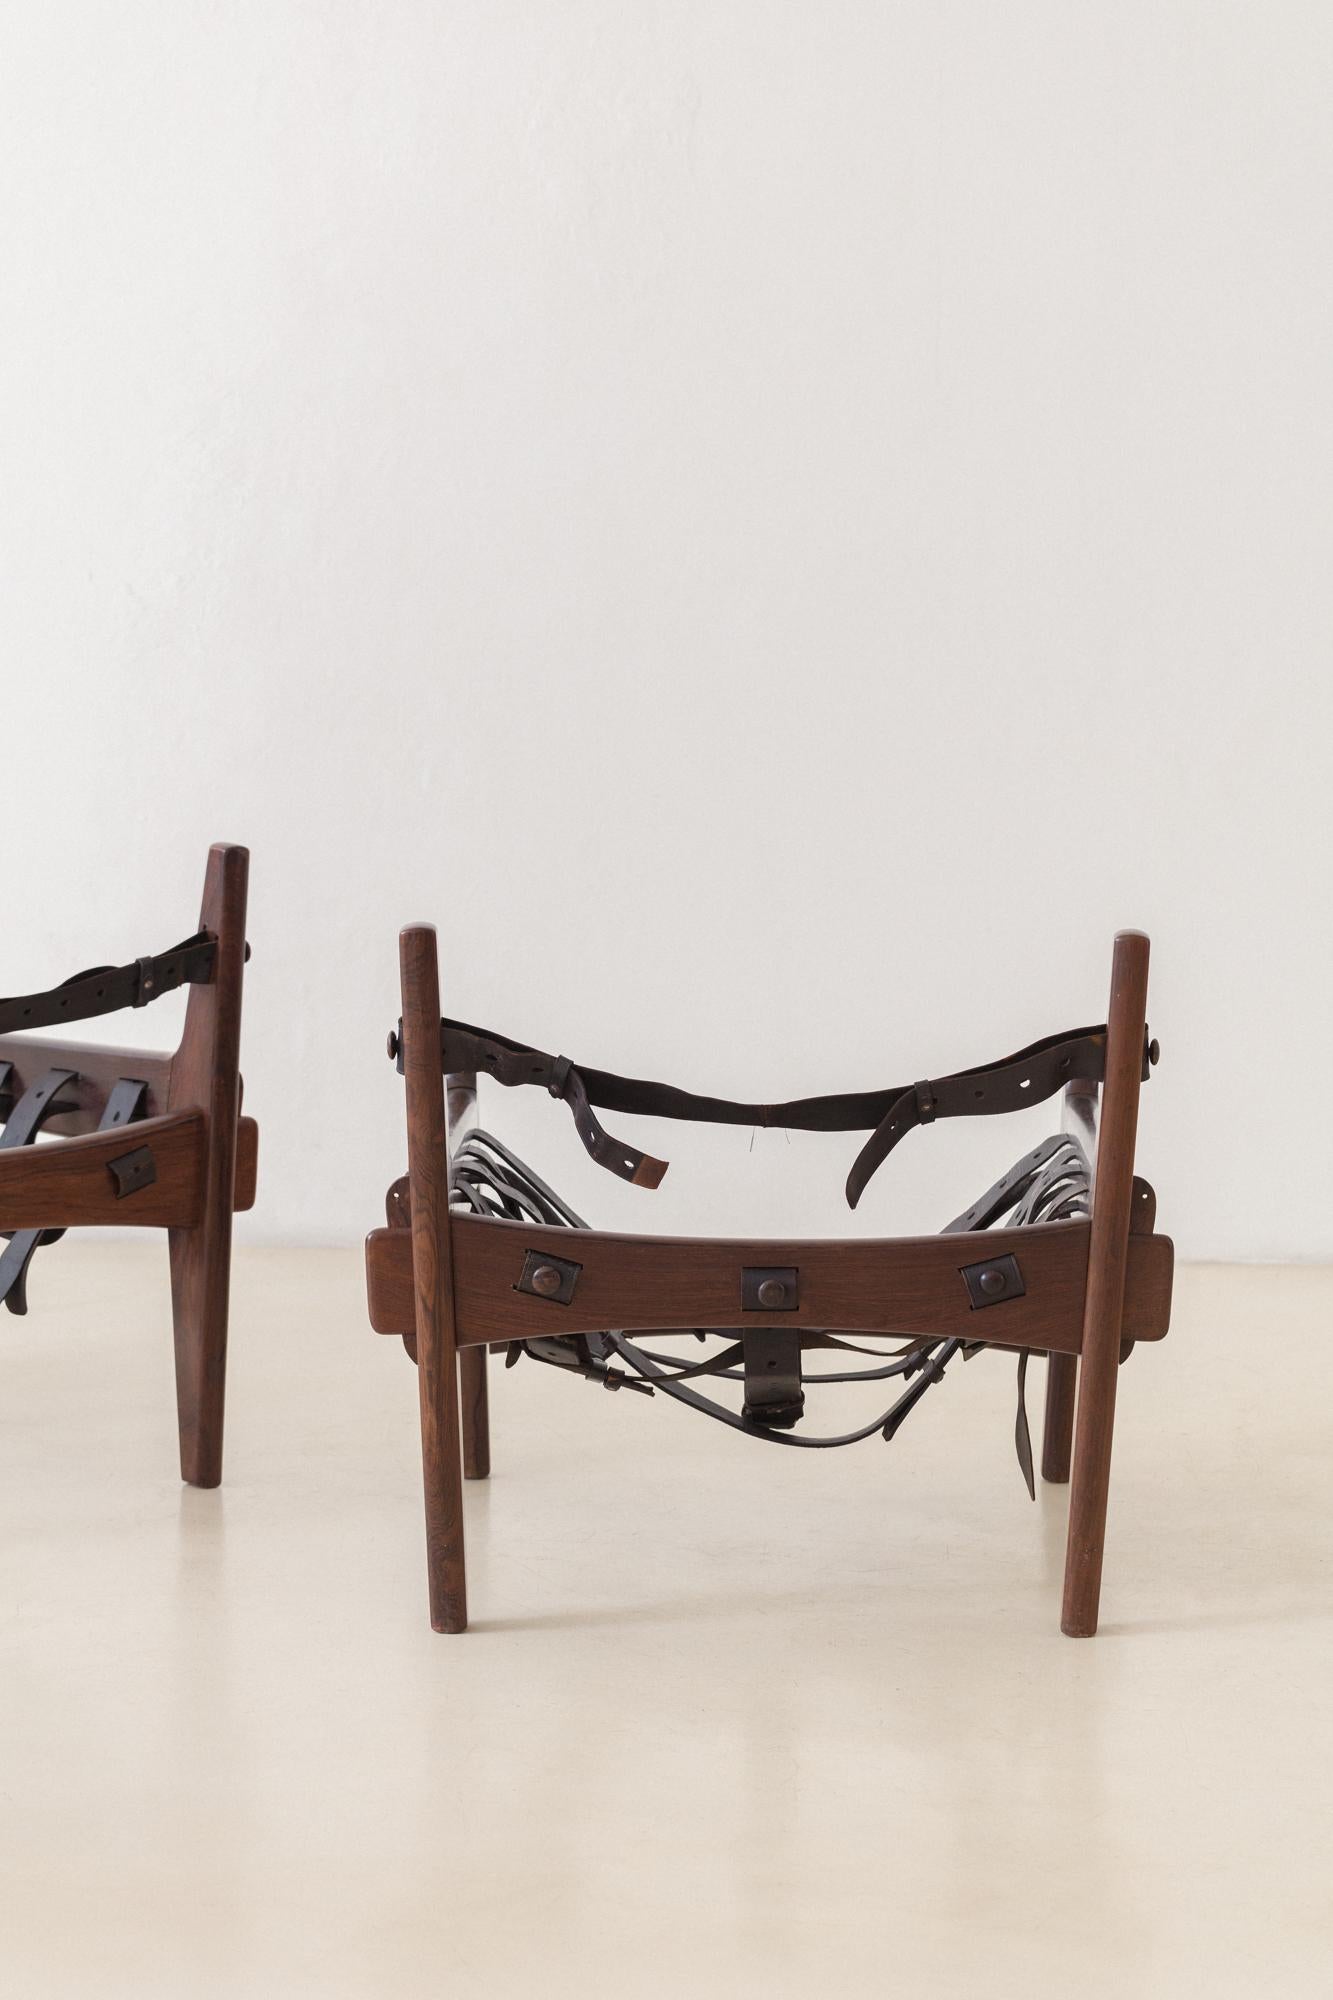 Vintage Pair of Moleca Rosewood Armchairs by Sergio Rodrigues, 1962, Brazil For Sale 11